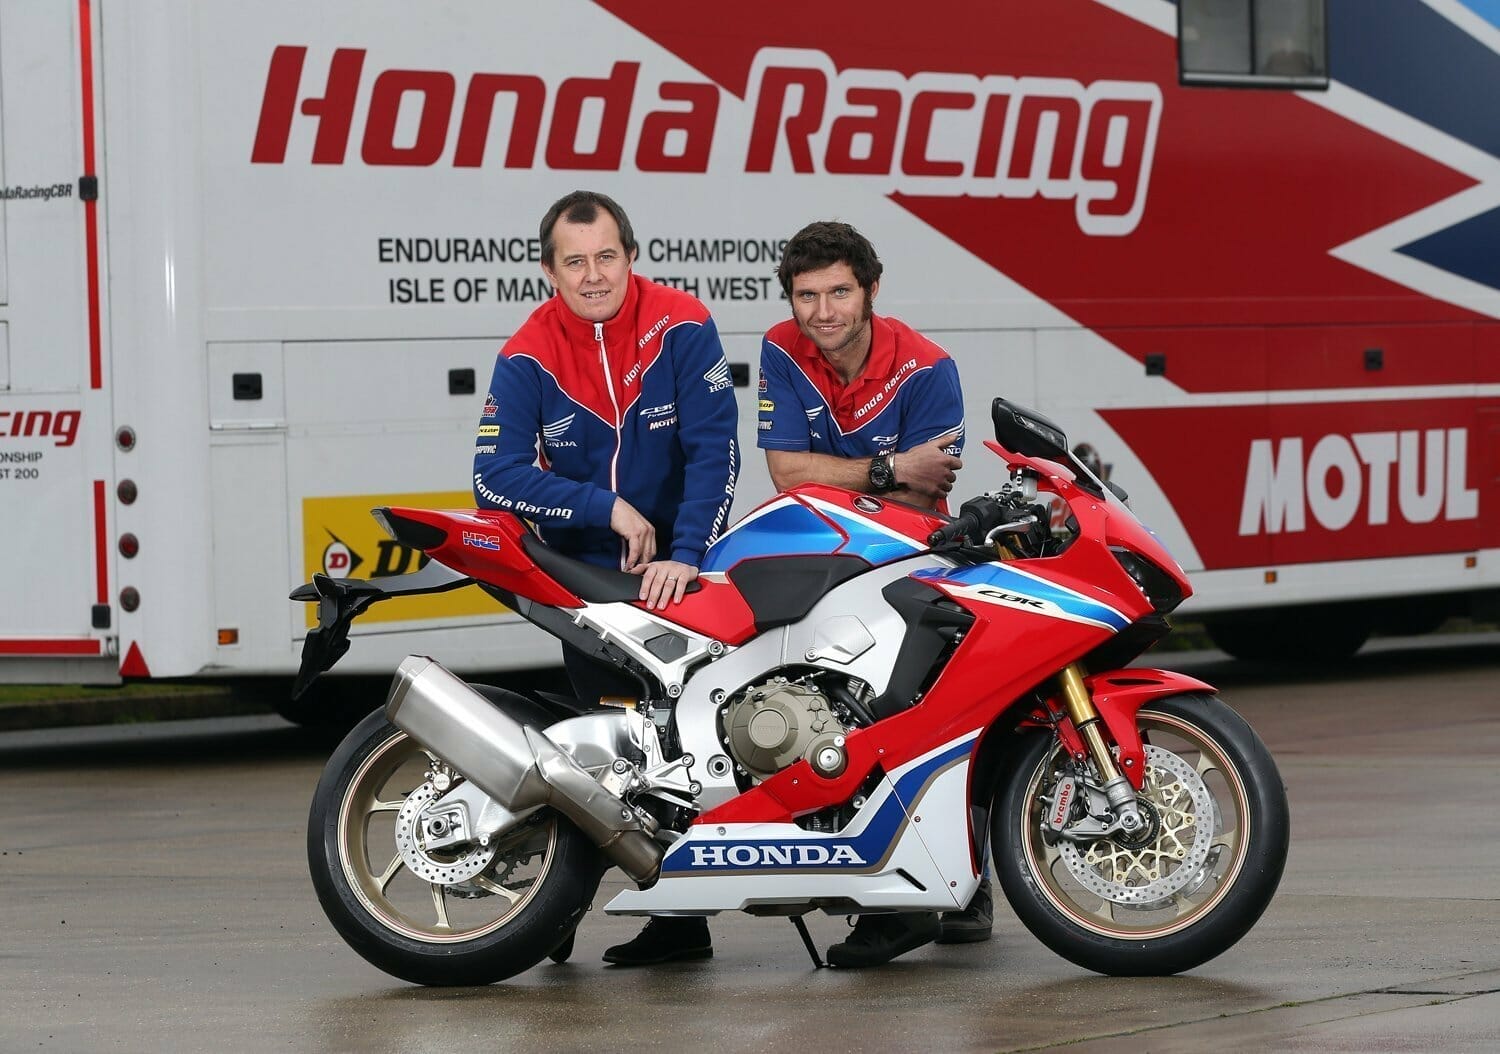 Career ending for John McGuinness after heavy accident?